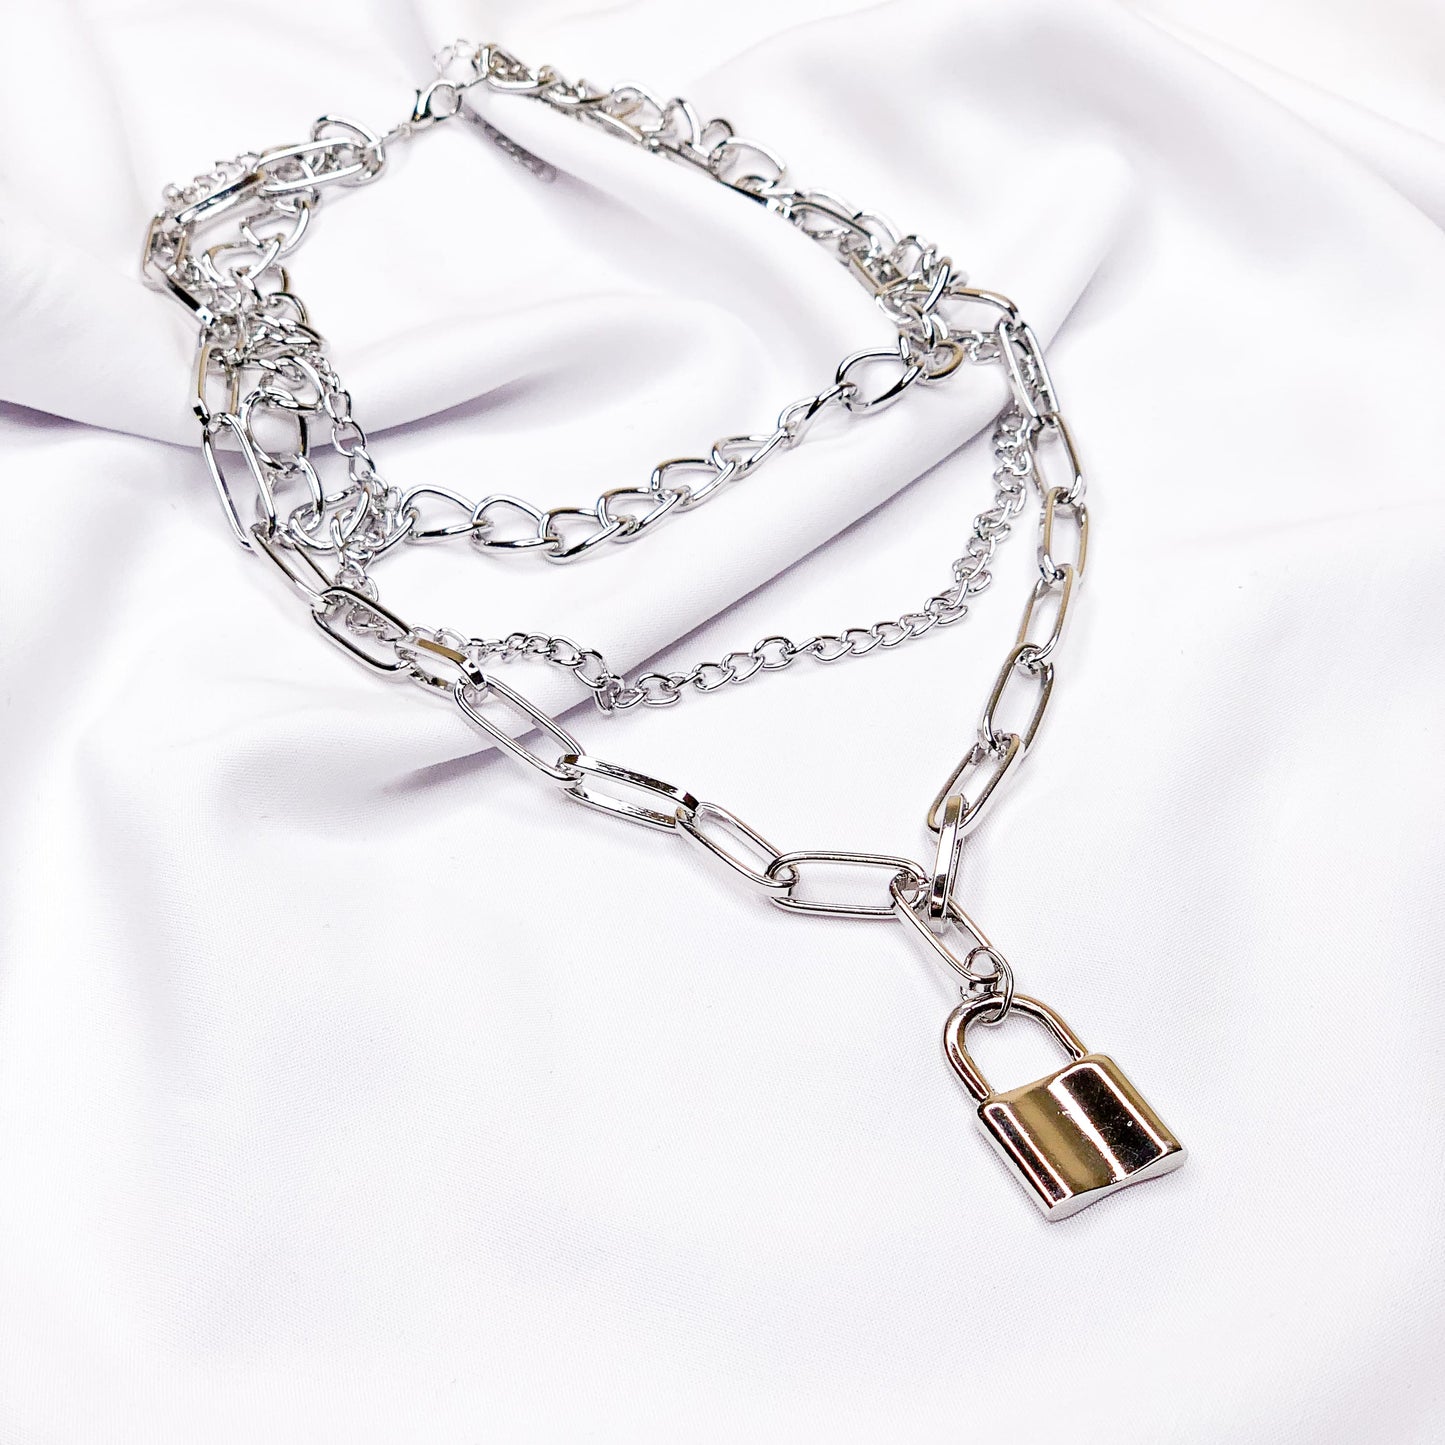 Silver > Necklace chain and lock Buy from e-shop